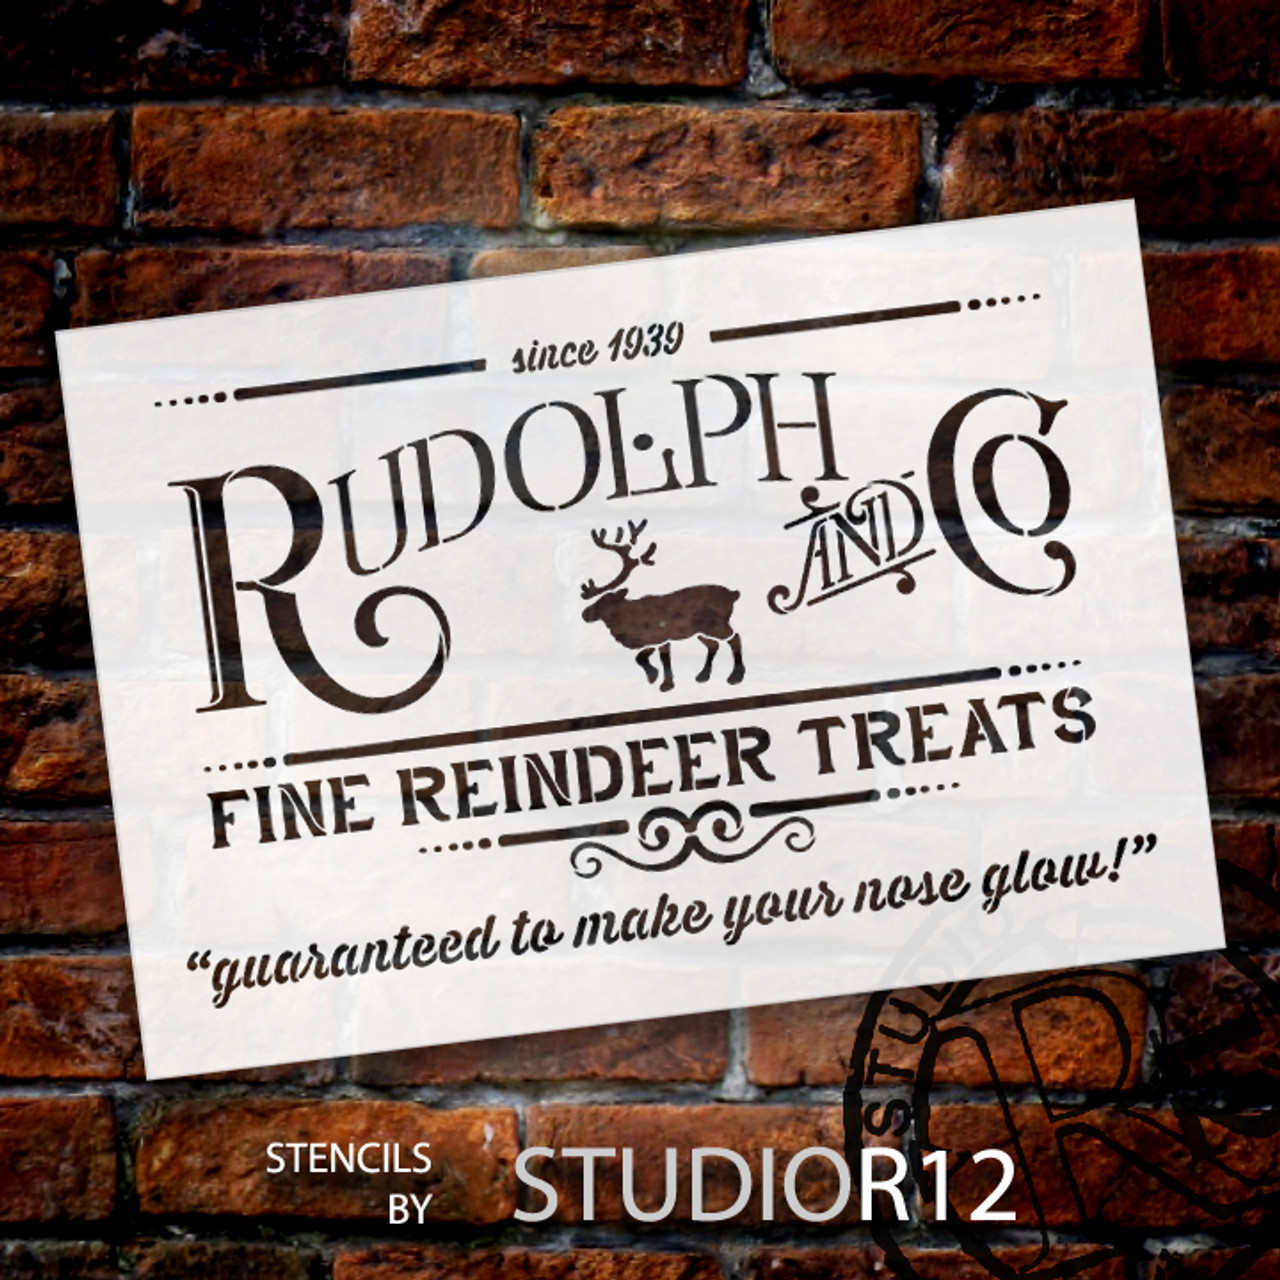 Rudolph and Co. Stencil by StudioR12 | Fine Reindeer Treats Christmas Word Art- 27" x 18" - STCL1538_4